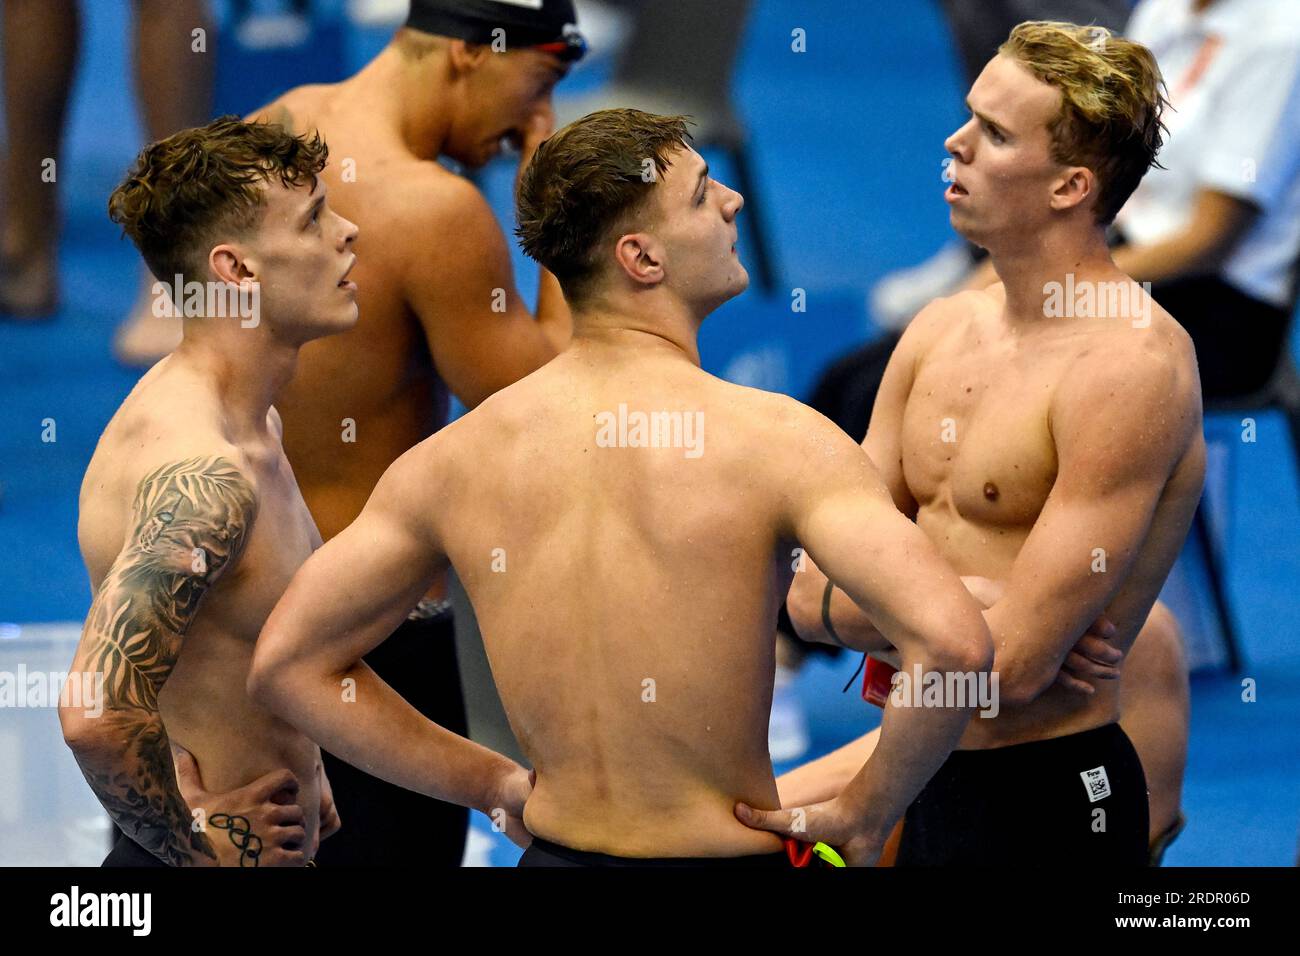 Fukuoka, Japan. 23rd July, 2023. Athletes of Great Britain react after been disqualified in the Men's 4x100 Freestyle relay preliminary during the 20th World Aquatics Championships at the Marine Messe Hall A in Fukuoka (Japan), July 23rd, 2023. Credit: Insidefoto di andrea staccioli/Alamy Live News Stock Photo